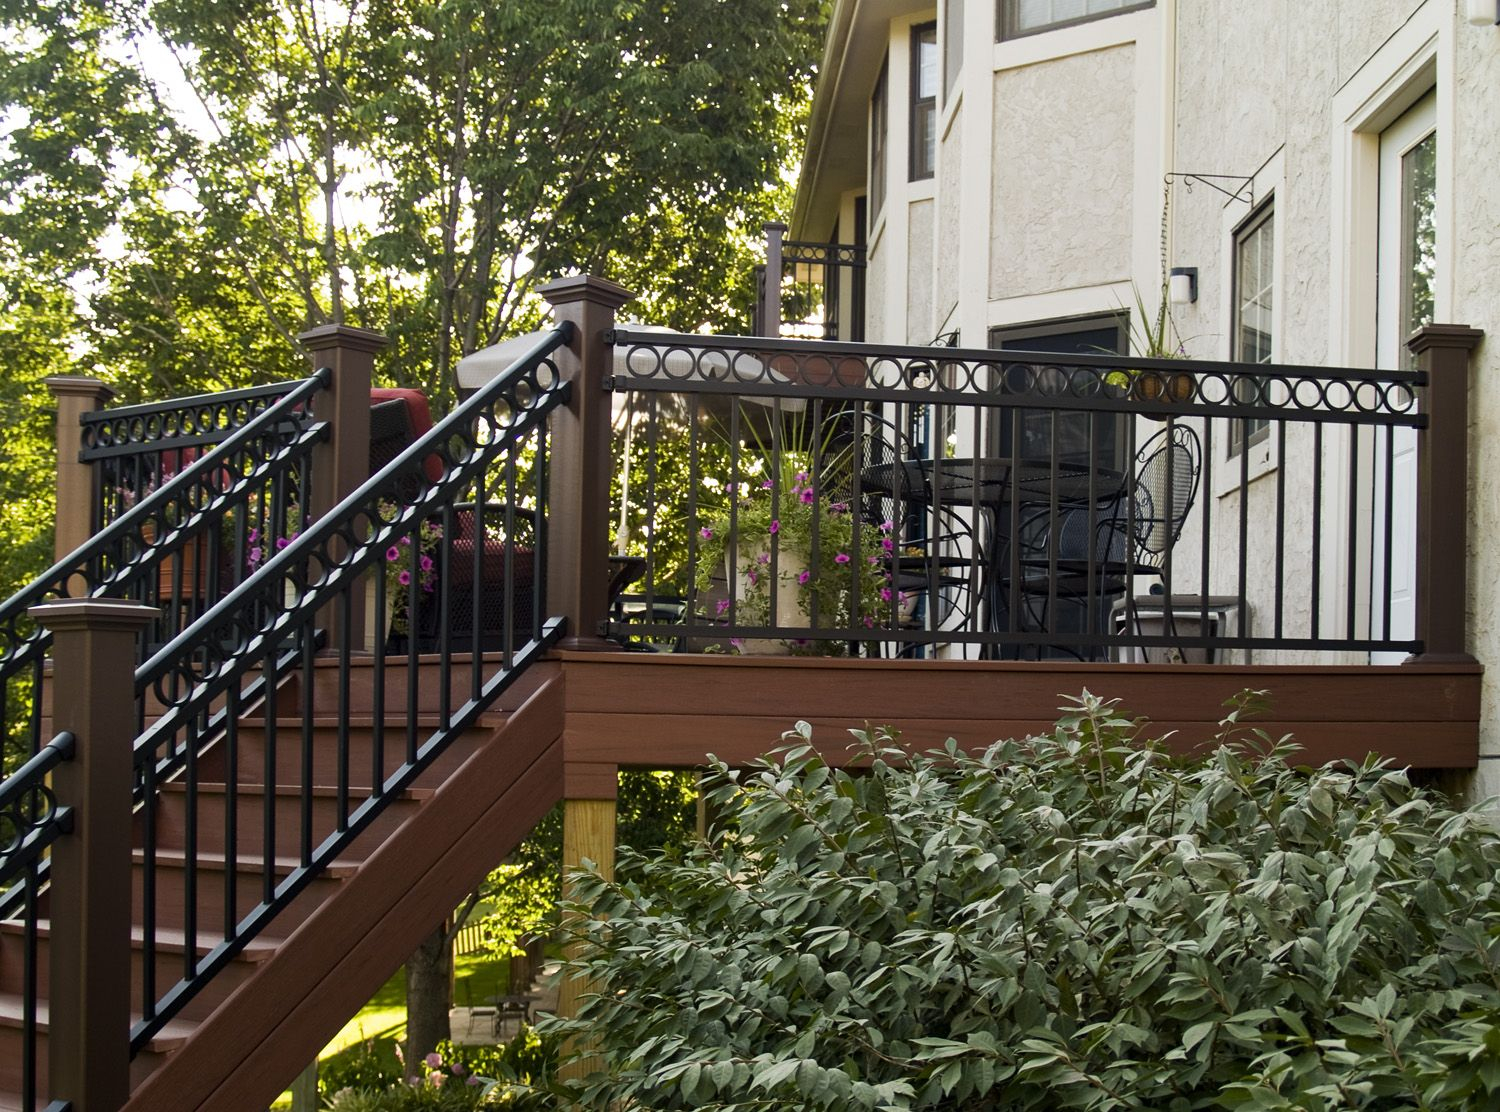 Metal Porch Railing Design Ideas Decors Gallery Including Railings within proportions 1500 X 1112